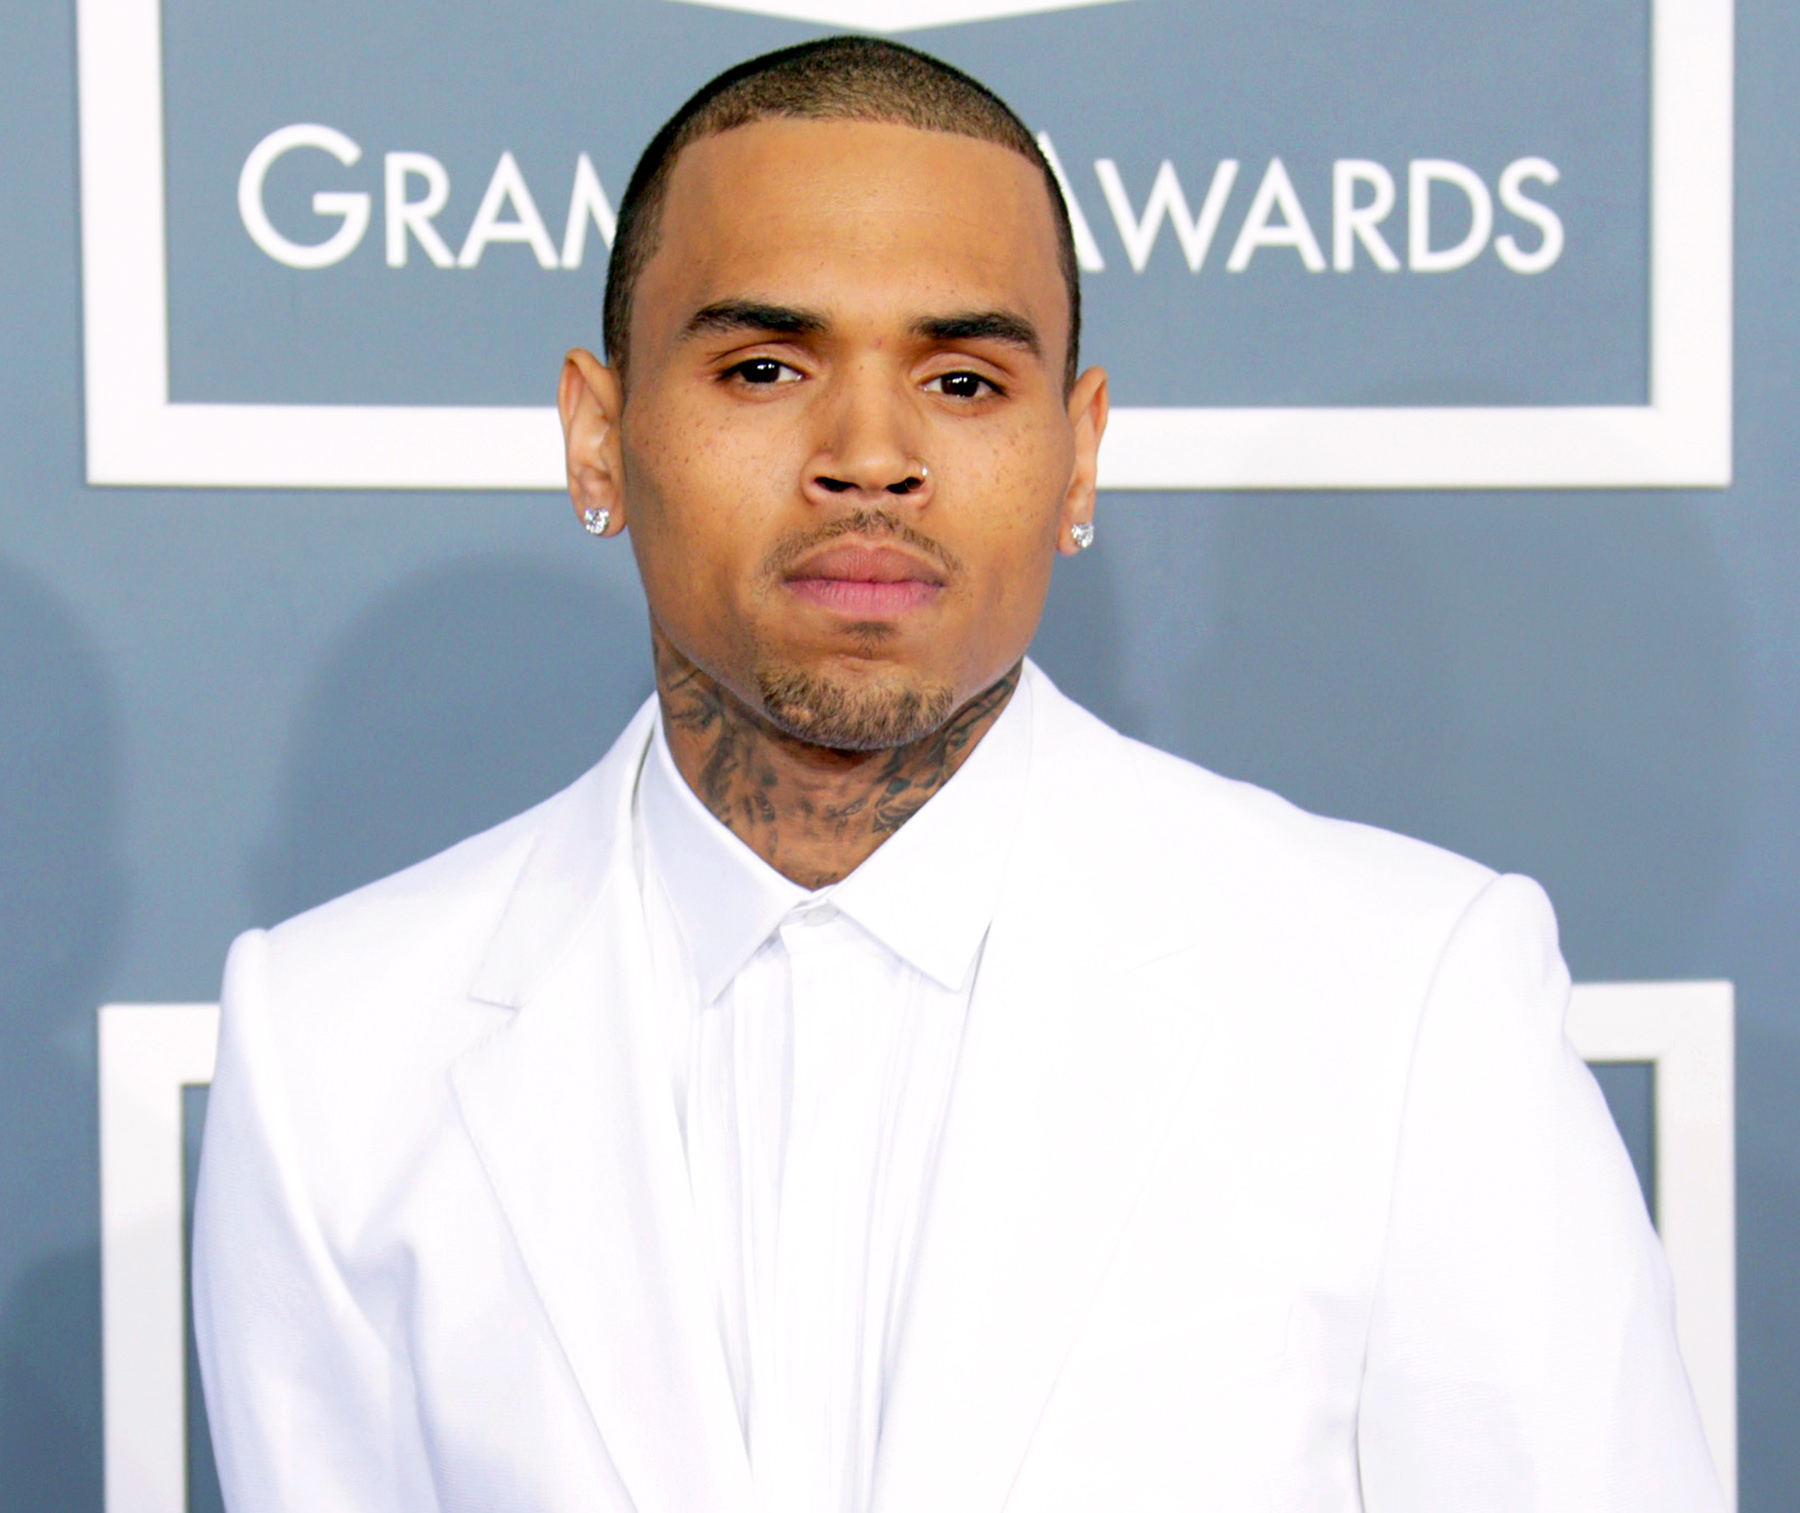 When Australia Denied Chris Brown Entrance Due To Domestic Abuse Charges